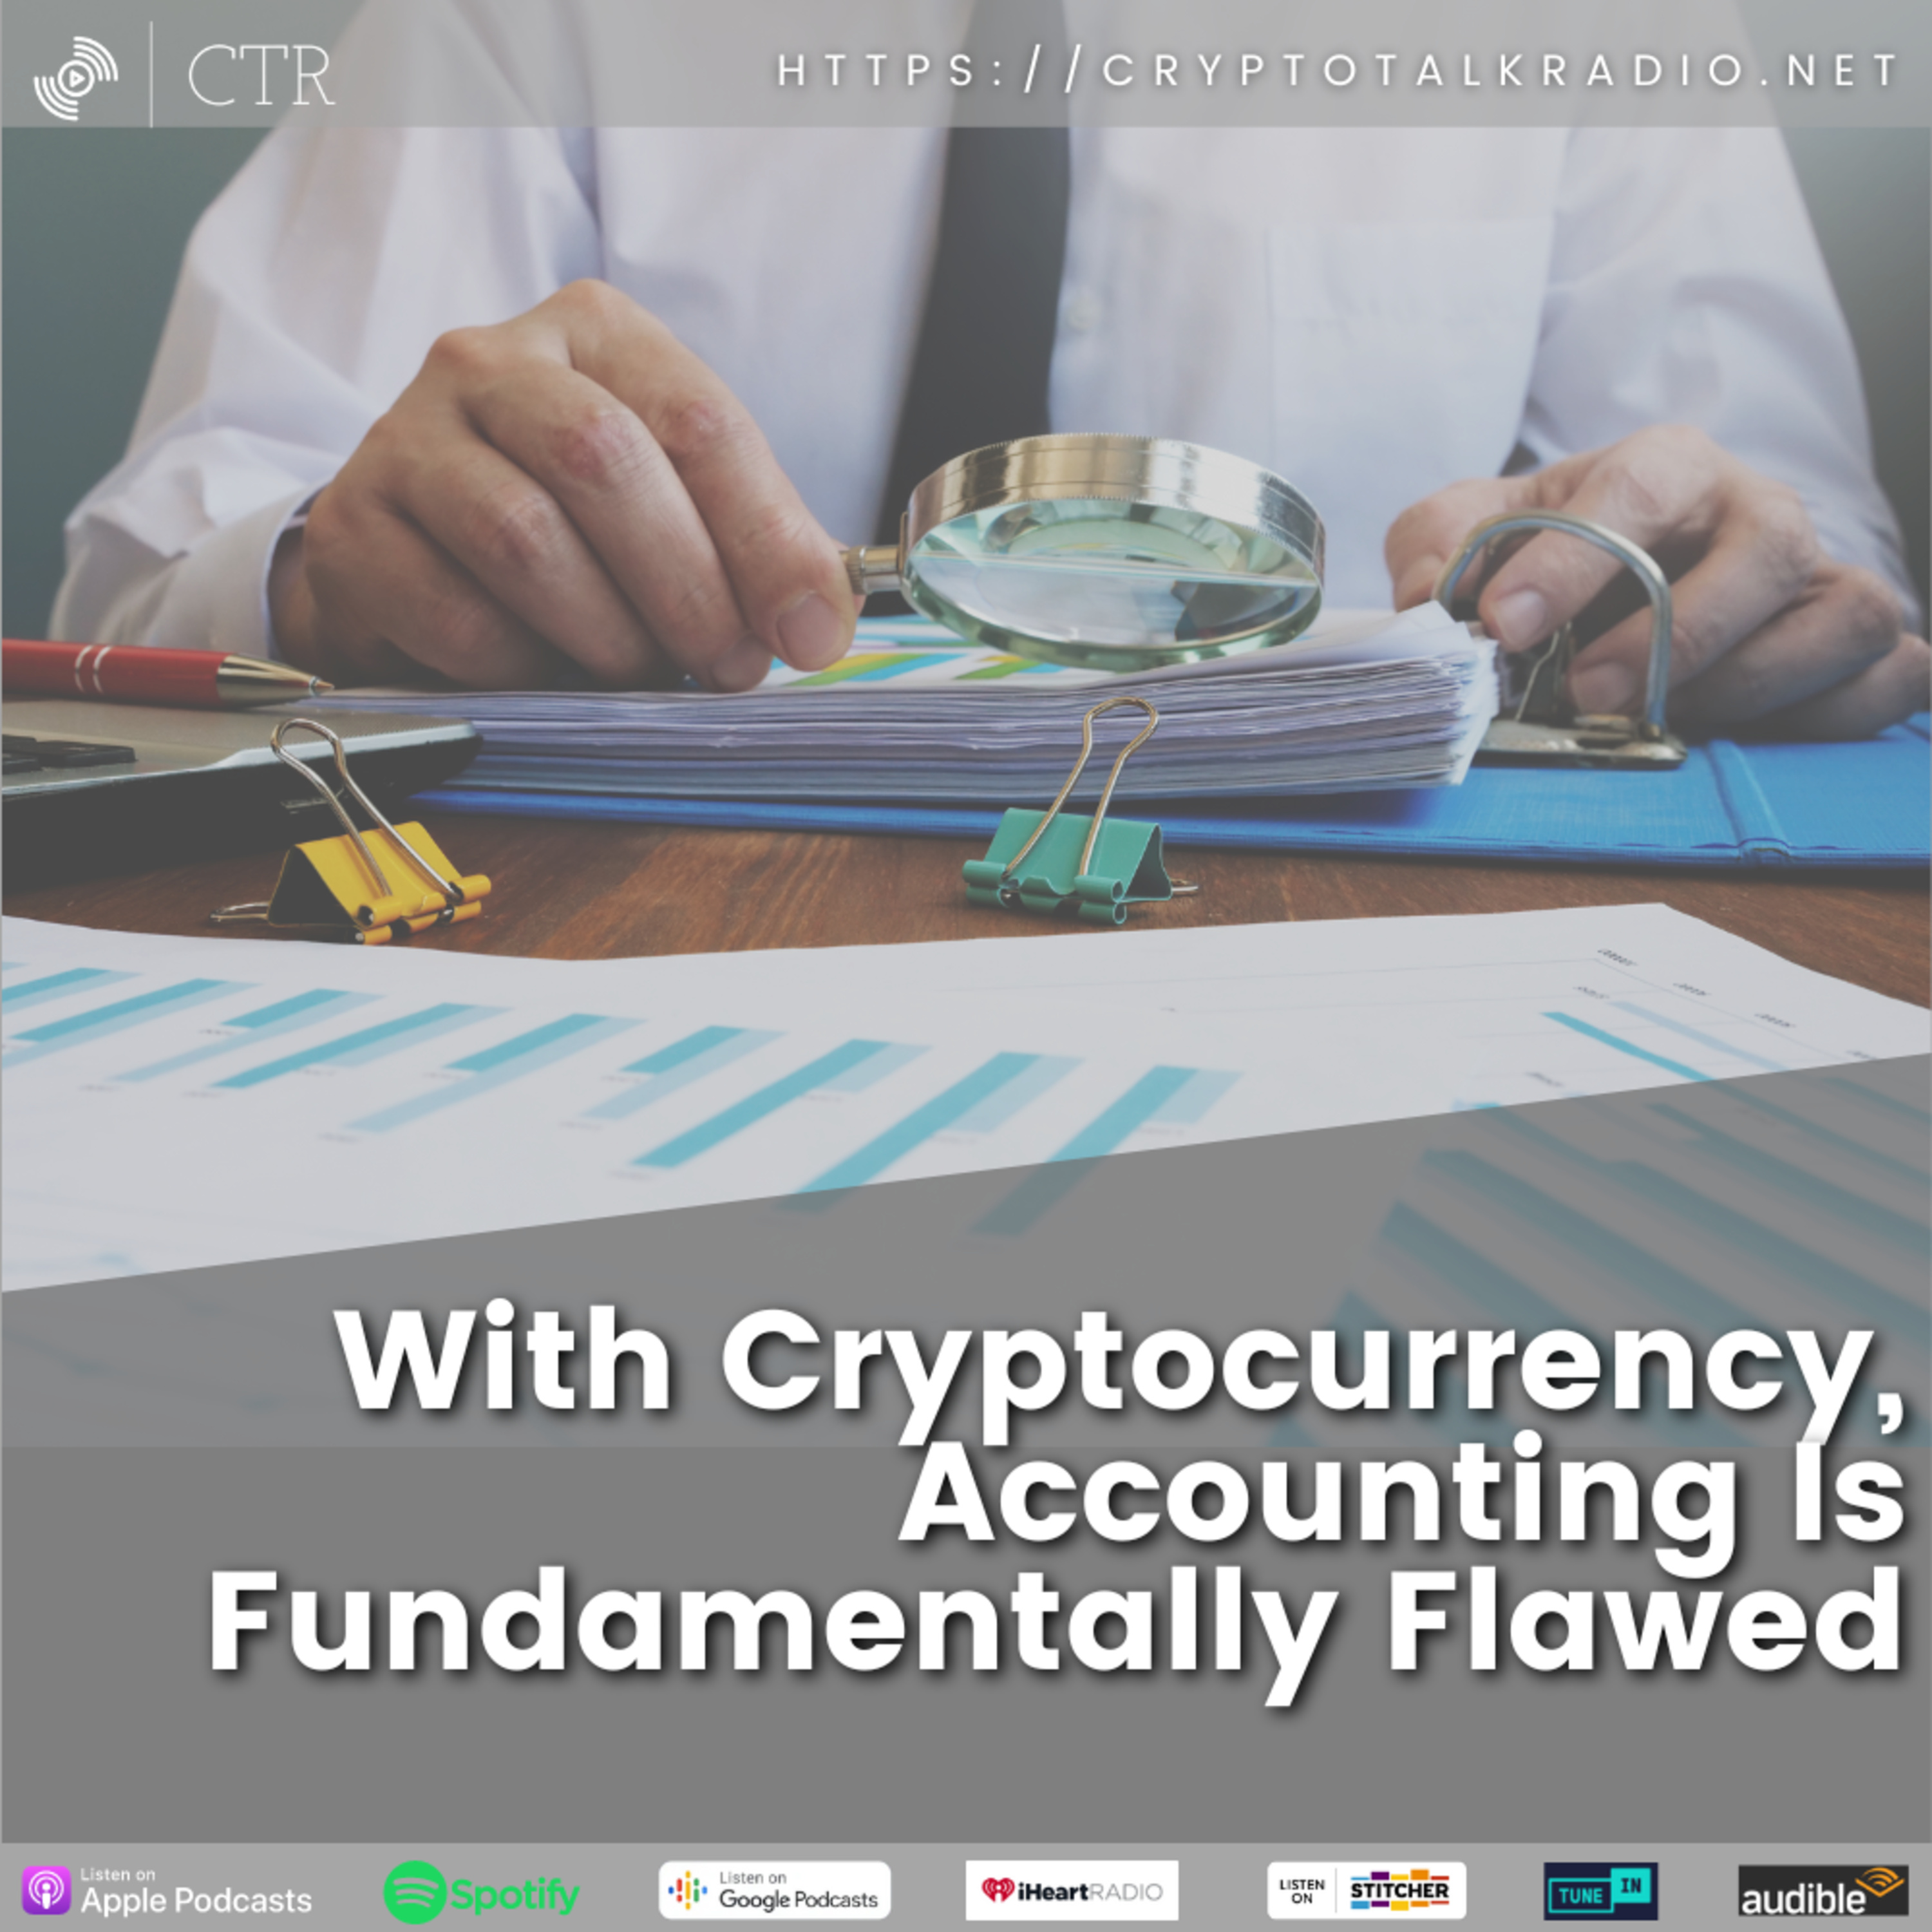 With Cryptocurrency, Accounting Is Fundamentally Flawed